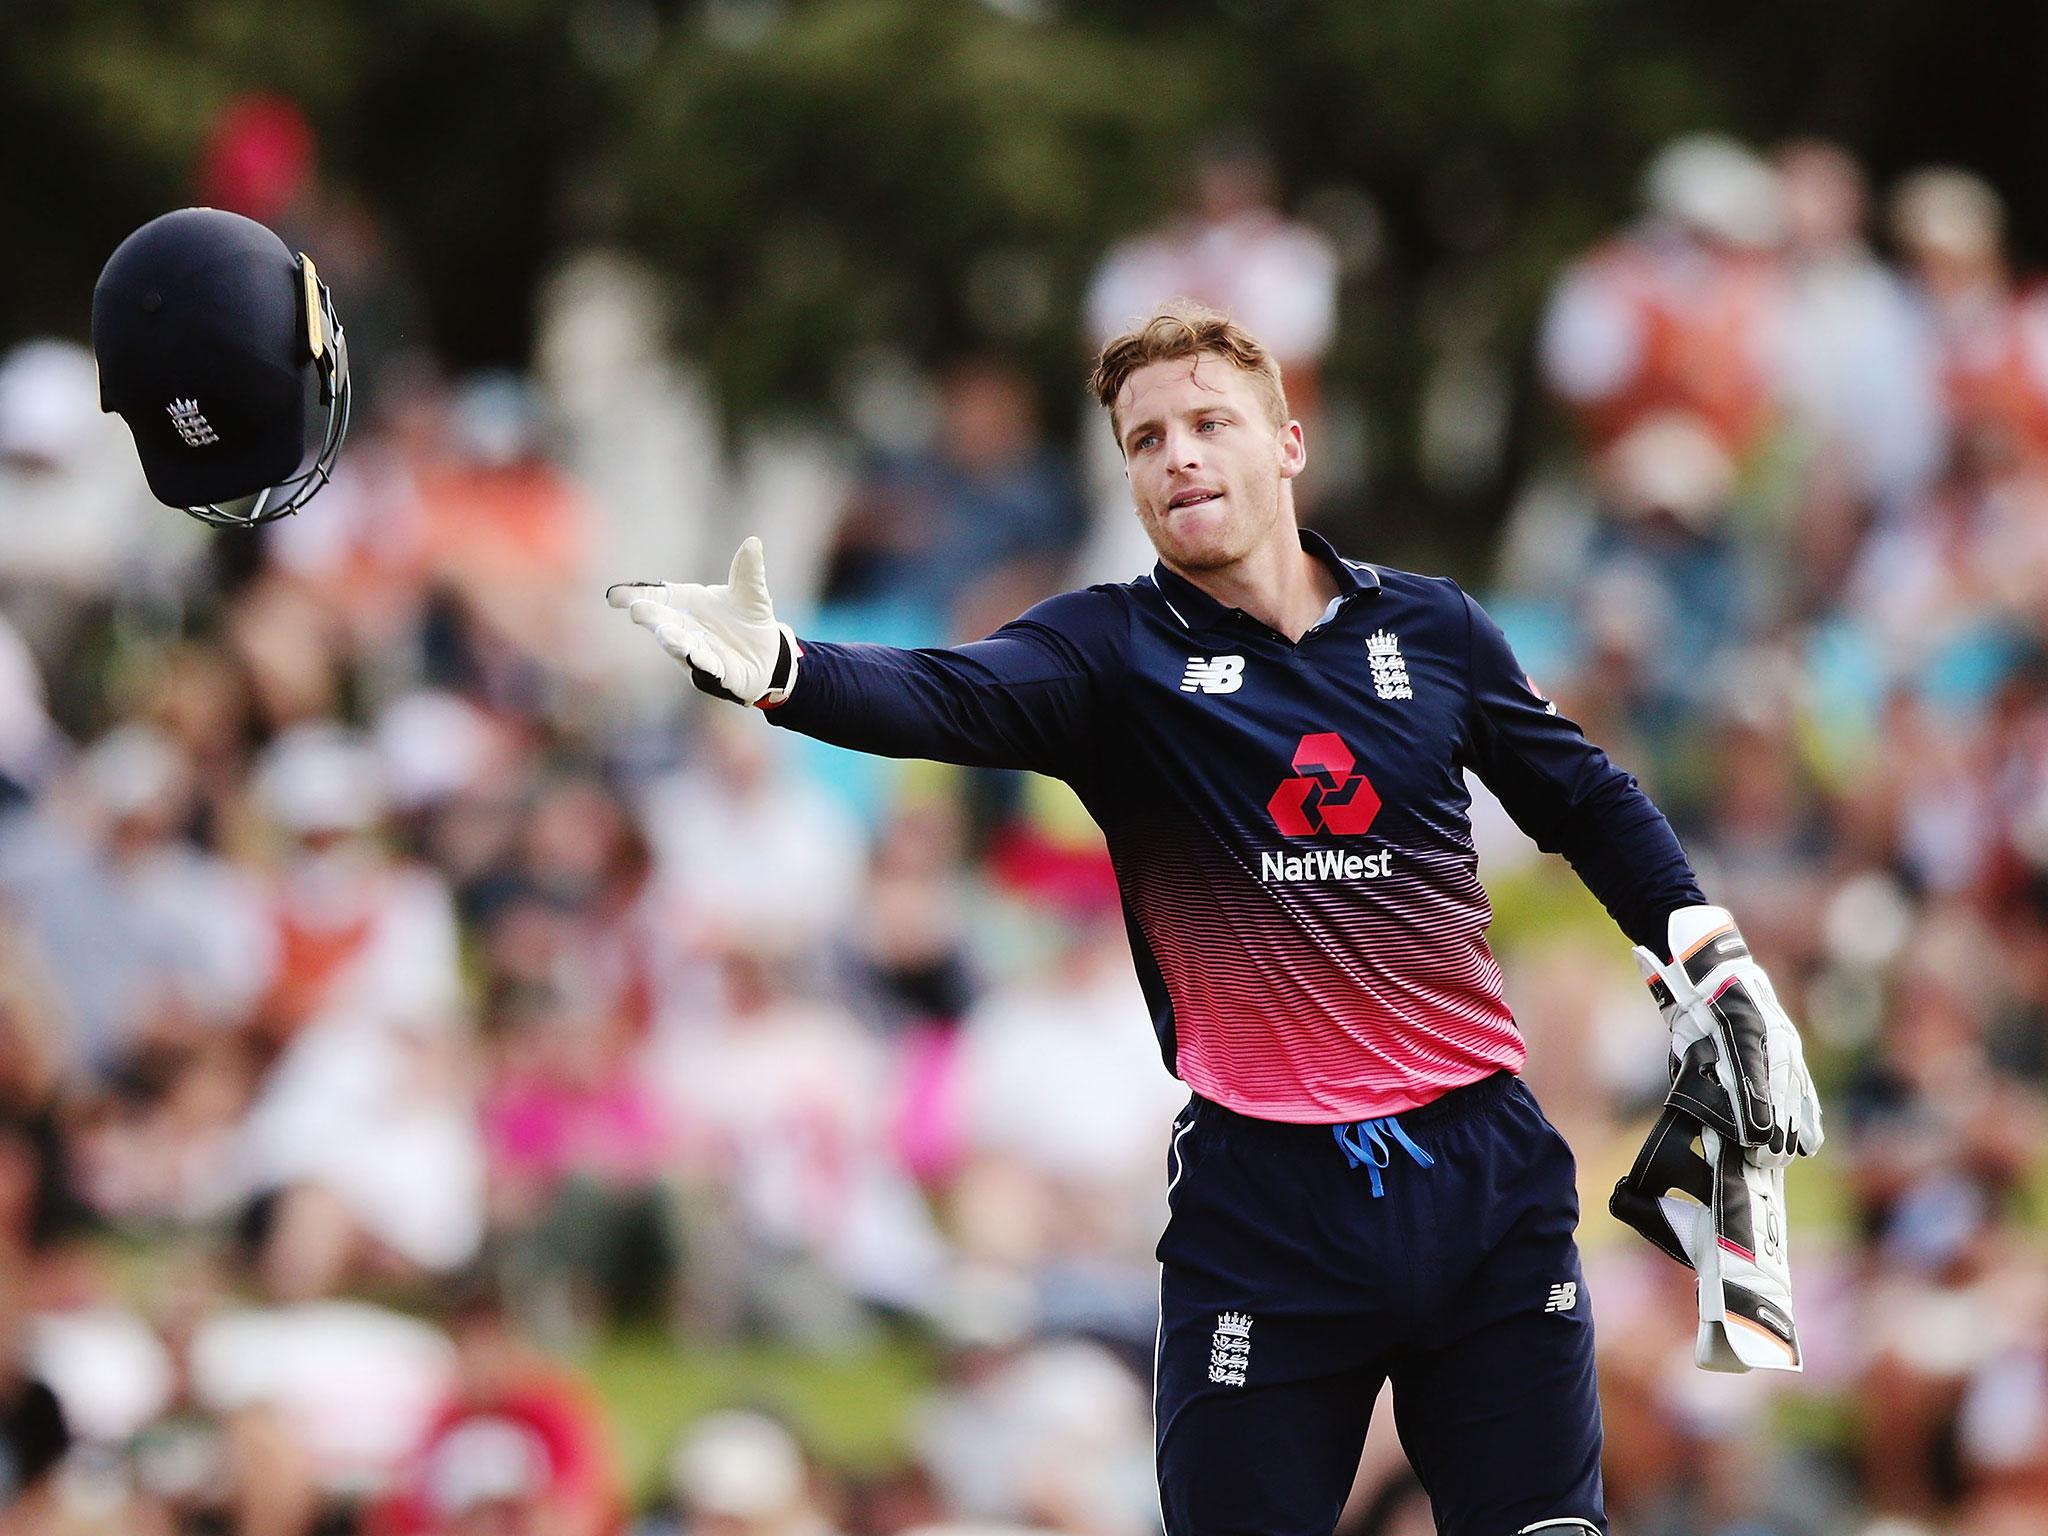 Buttler has been handed a recall to the England Test side